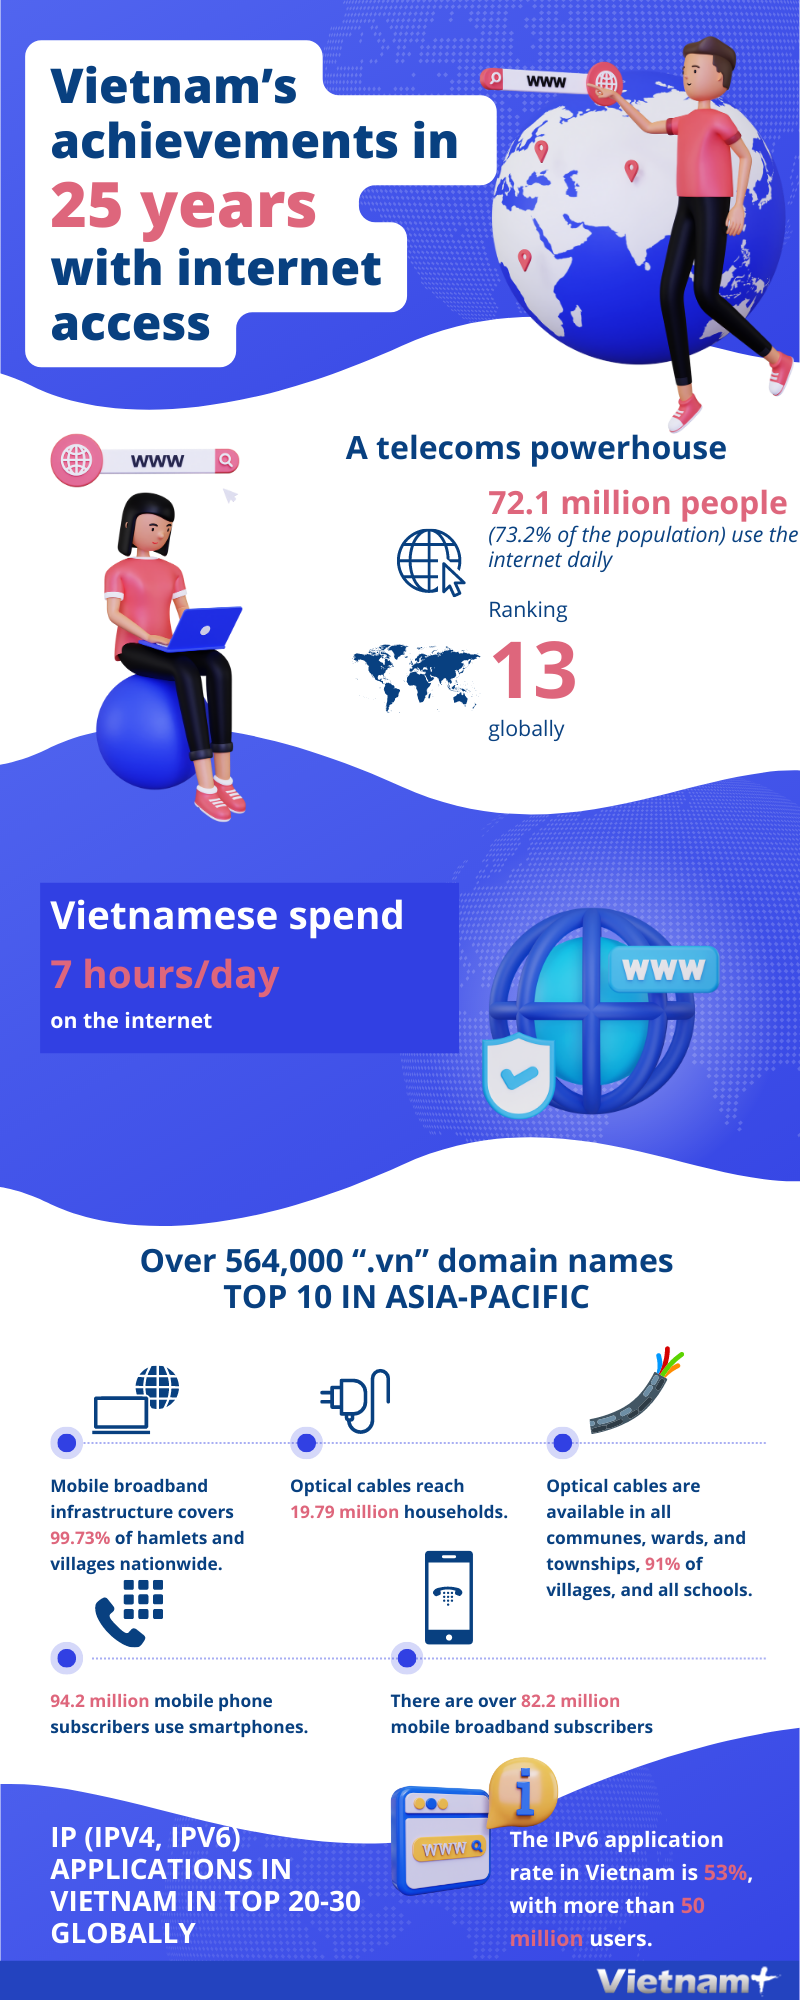 Vietnam’s achievements in 25 years with internet access